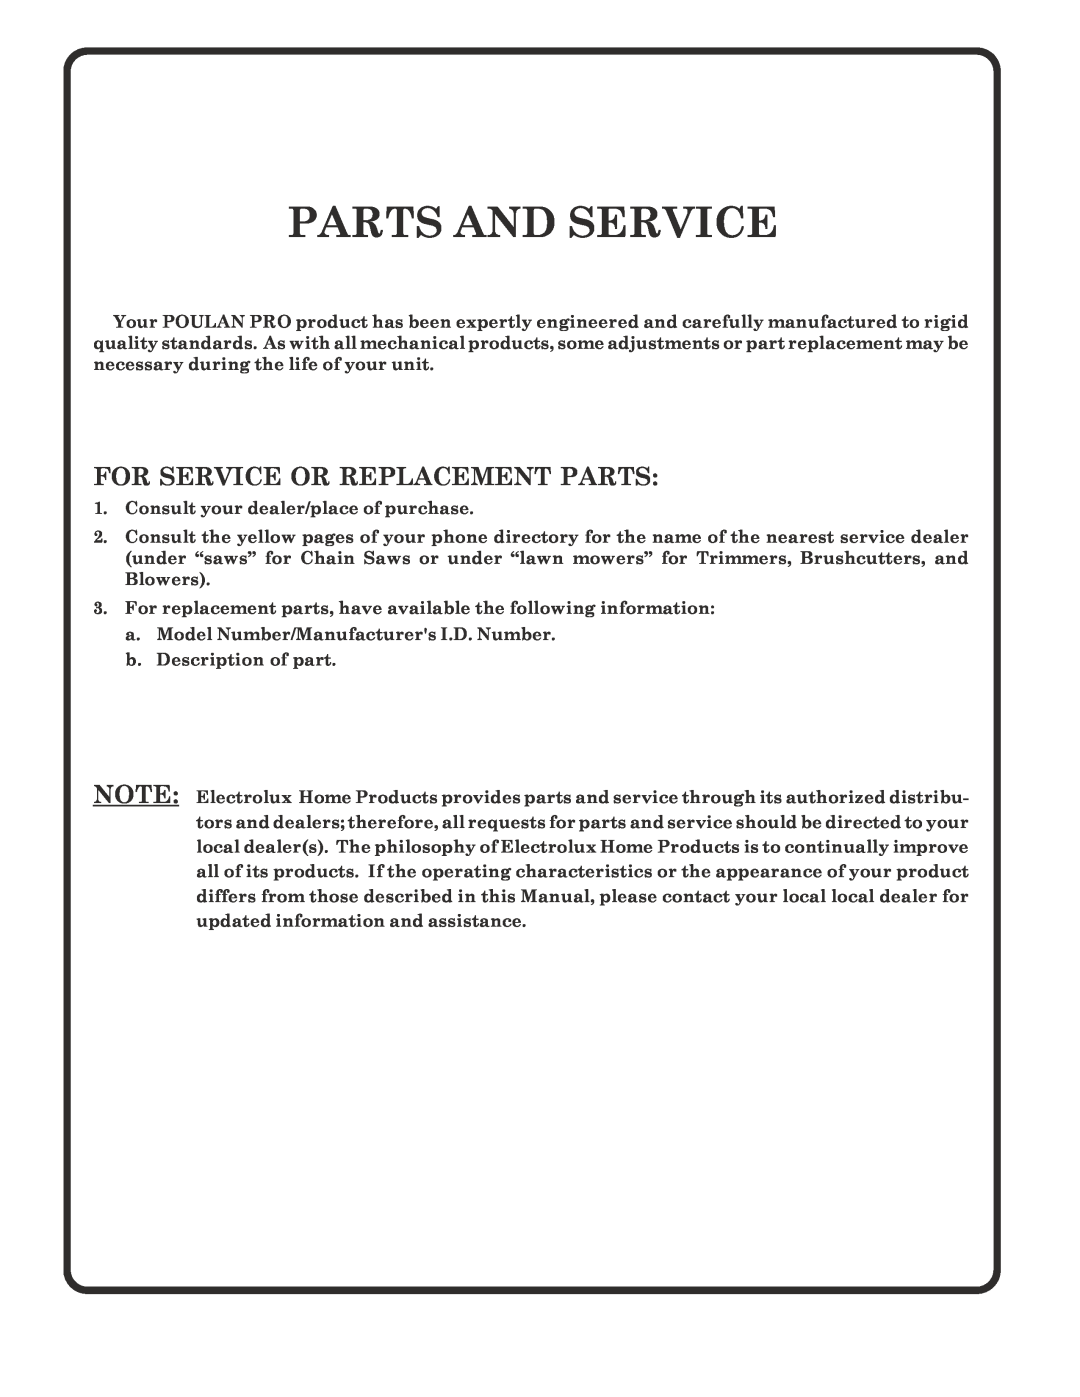 Poulan 182770 owner manual Parts And Service, For Service Or Replacement Parts 